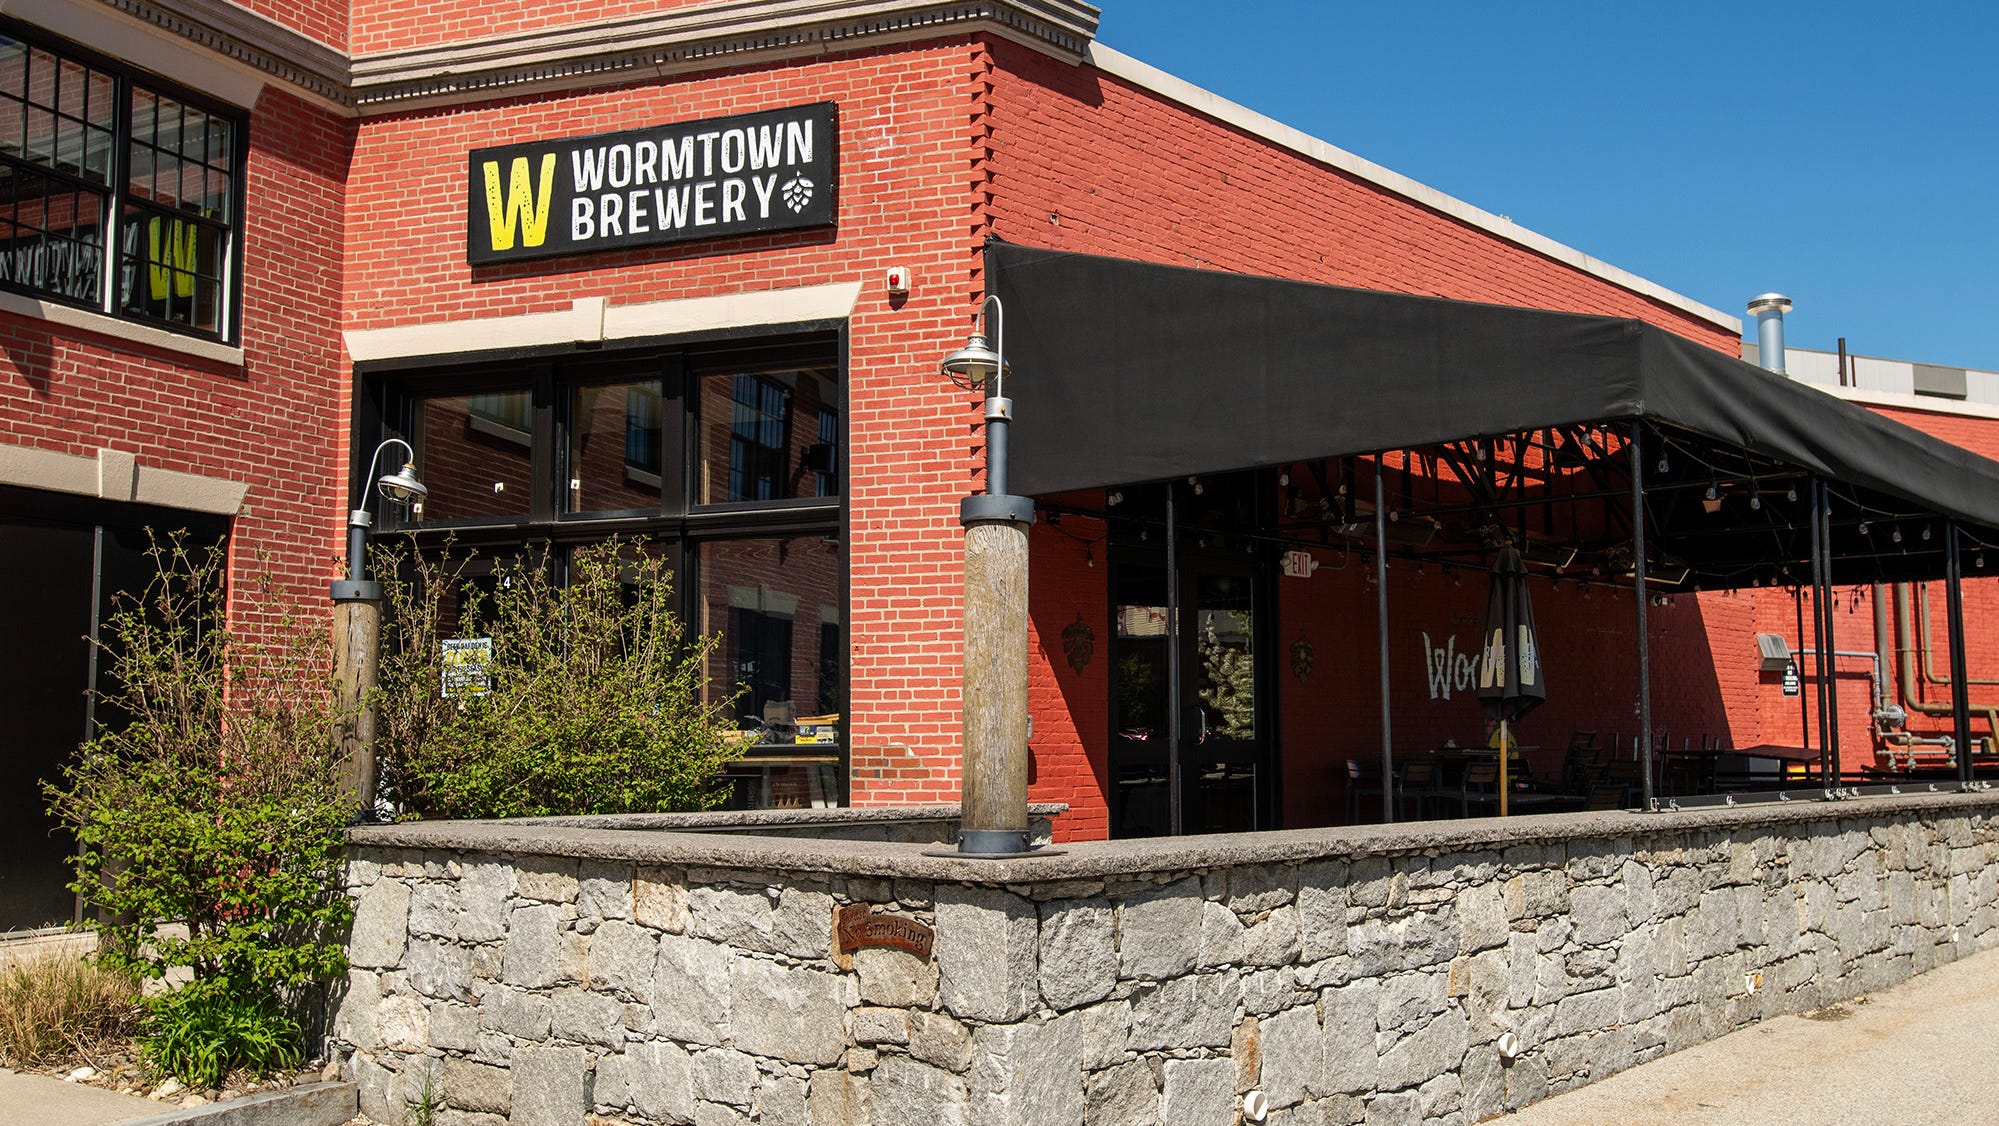 Jack's Abby set to purchase Wormtown Brewery, most of staff to remain